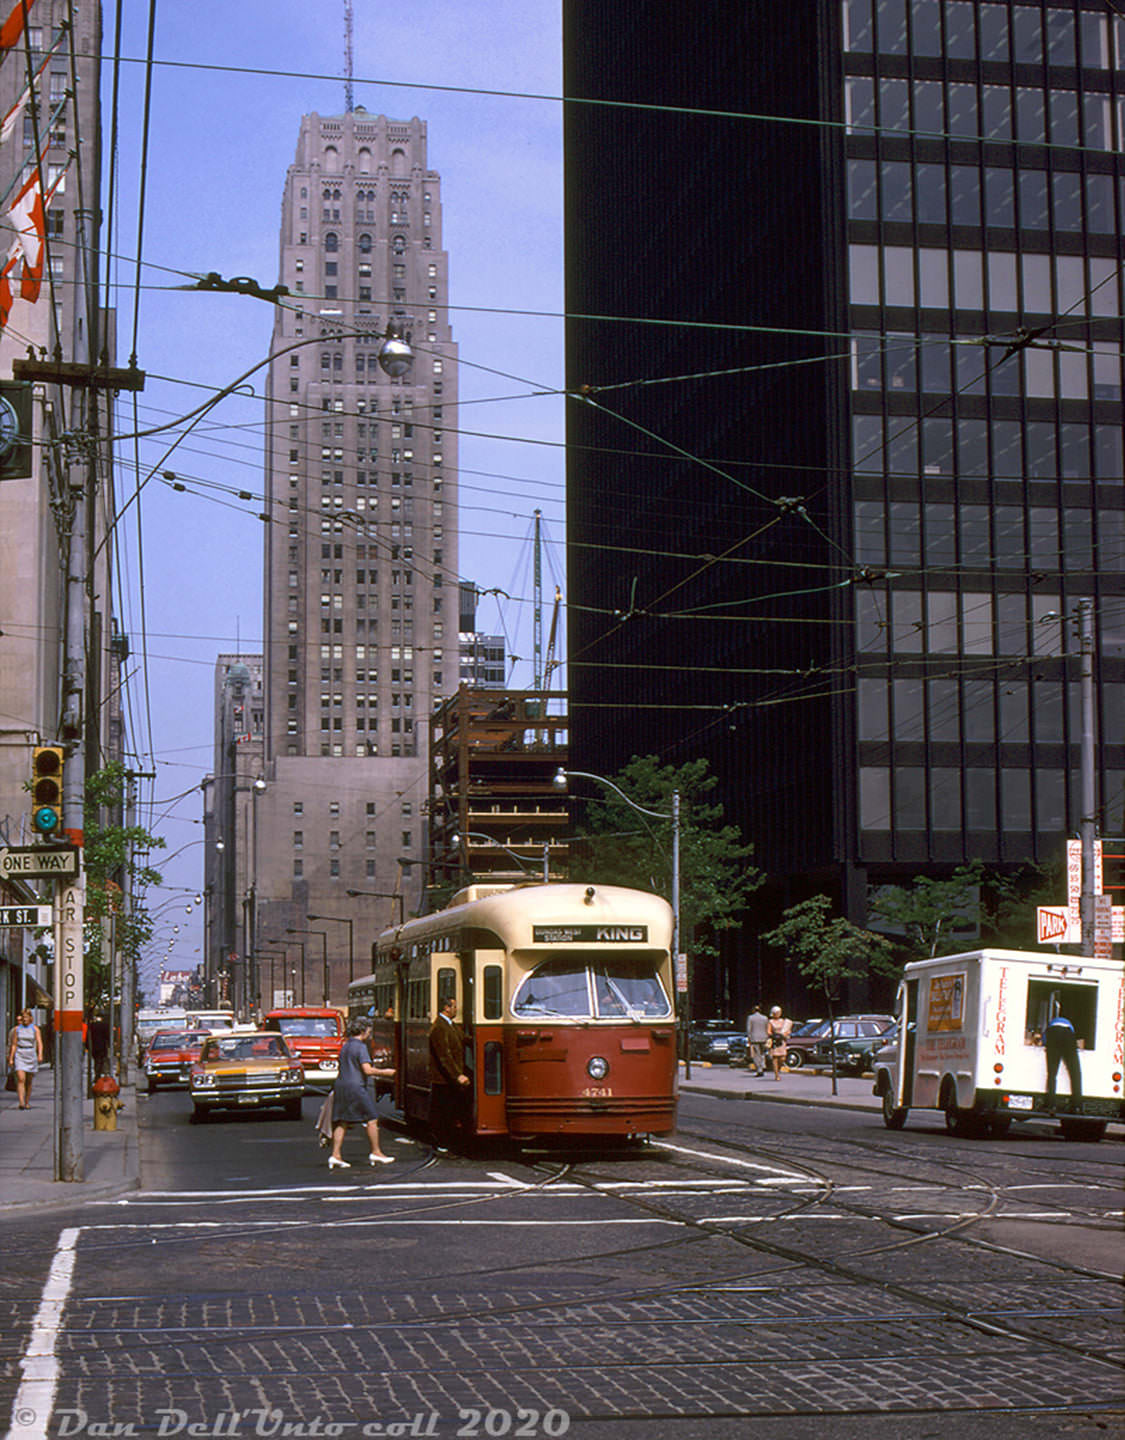 TTC PCC streetcar 4741 (acquired secondhand by Toronto, originally build for Birmingham Alabama) stops at the corner of King & York to pickup westbound passengers in June 1970.